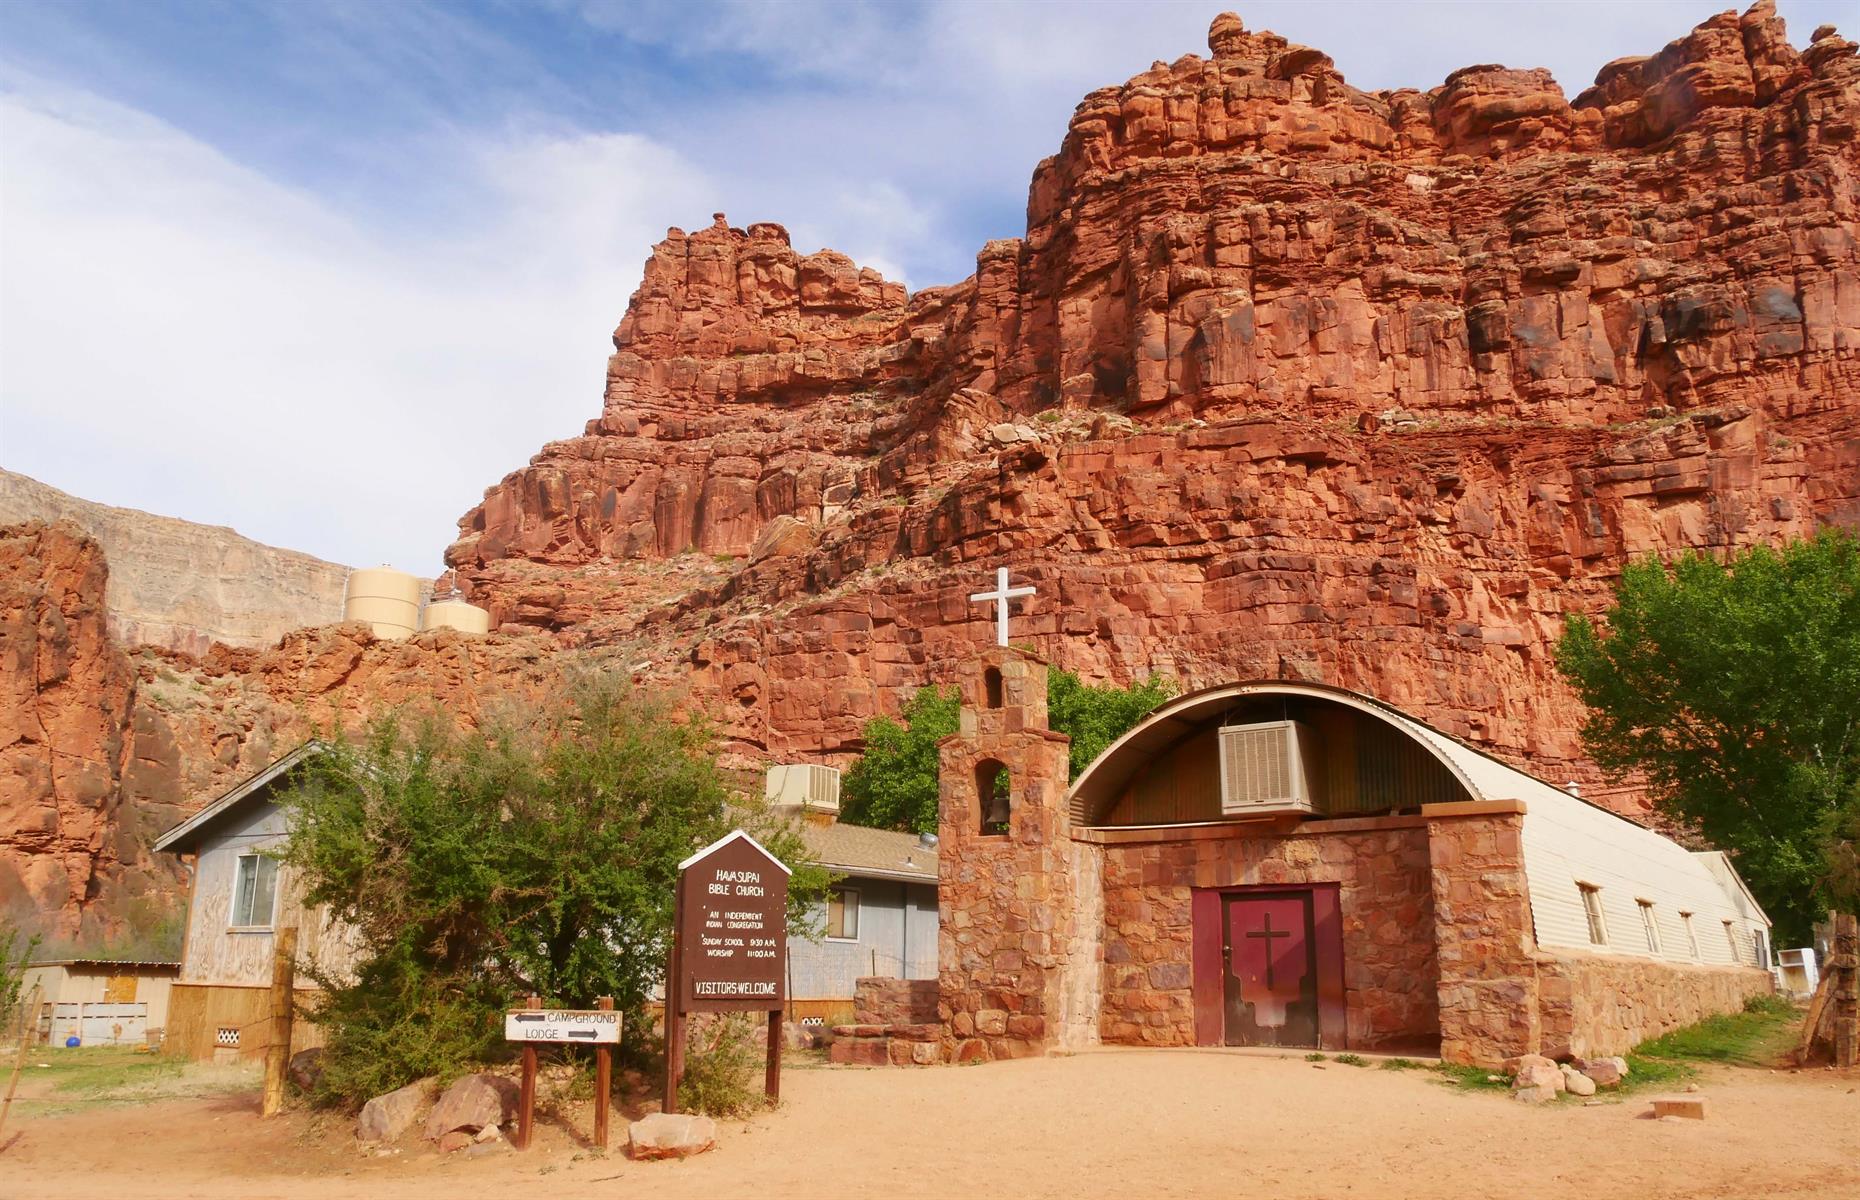 Spread over 188,000 acres of land, the canyon is prone to flash floods but still attracts more than 20,000 visitors a year. With a school, store and a small church, the village offers some amenities for the locals.